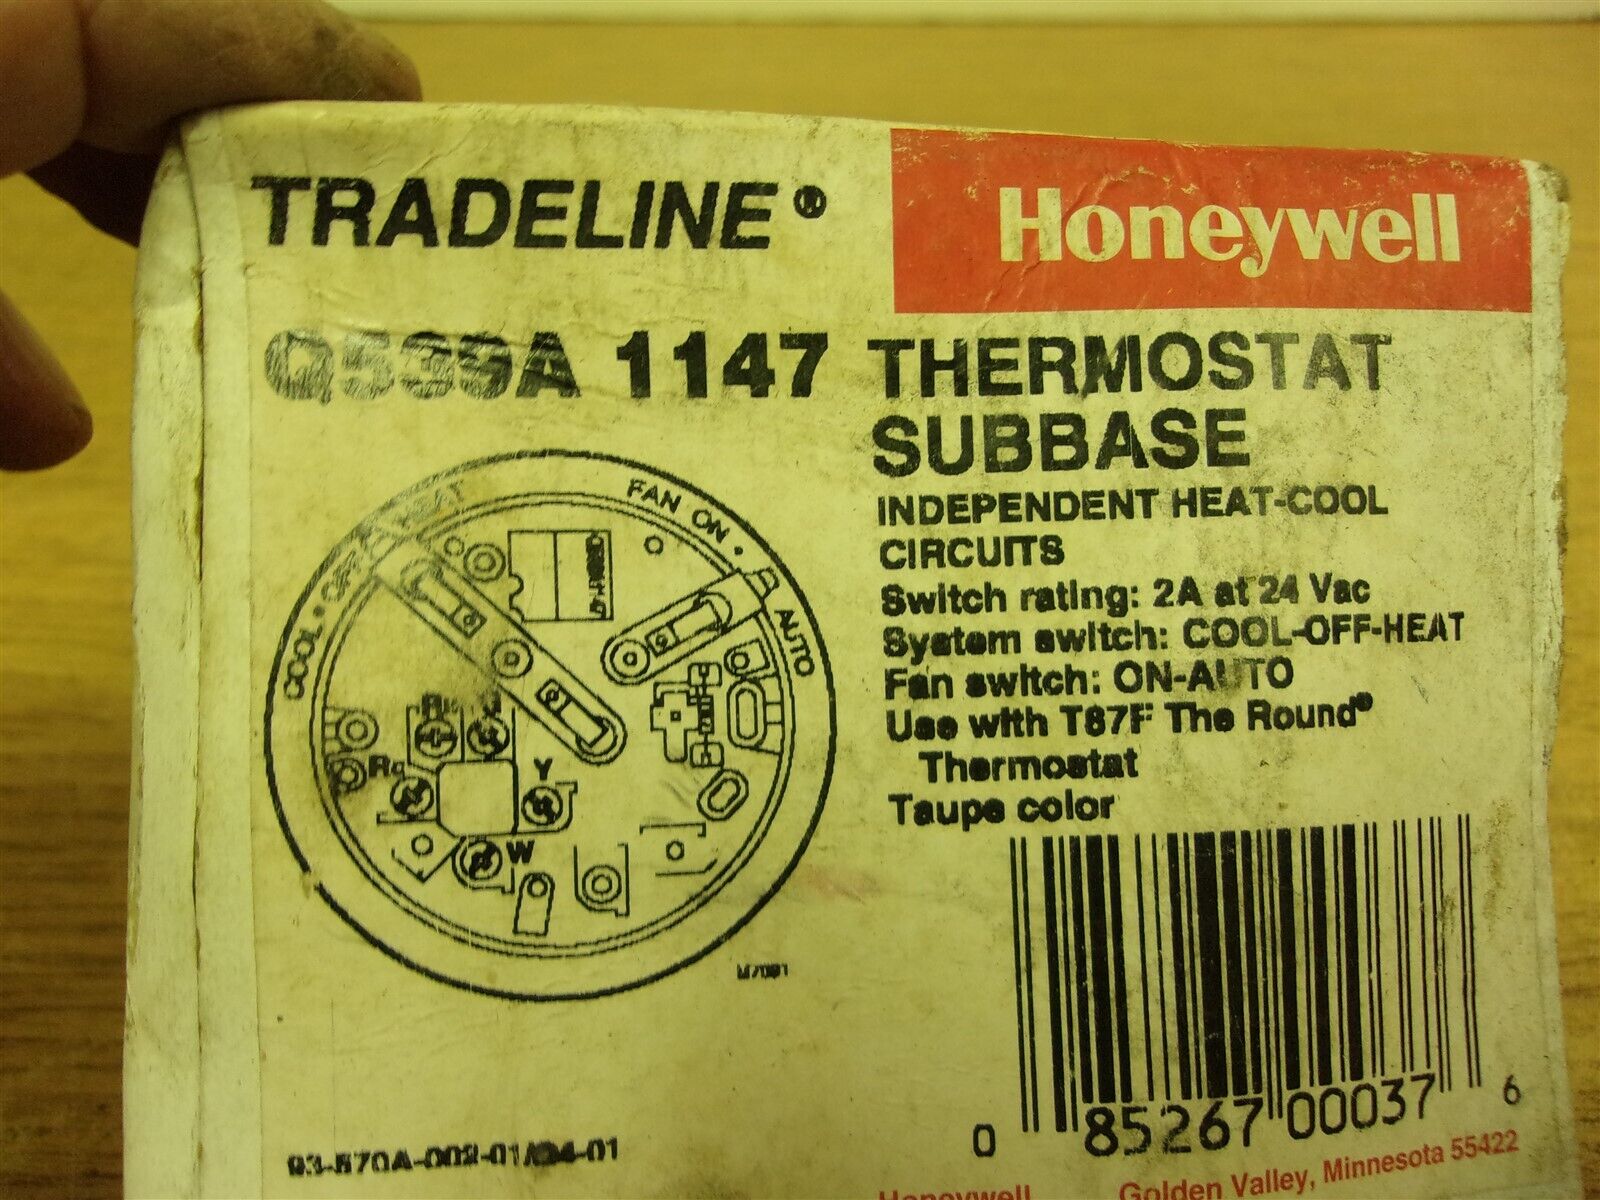 NEW Honeywell Q539A 1147 Thermostat Subbase   *FREE SHIPPING*